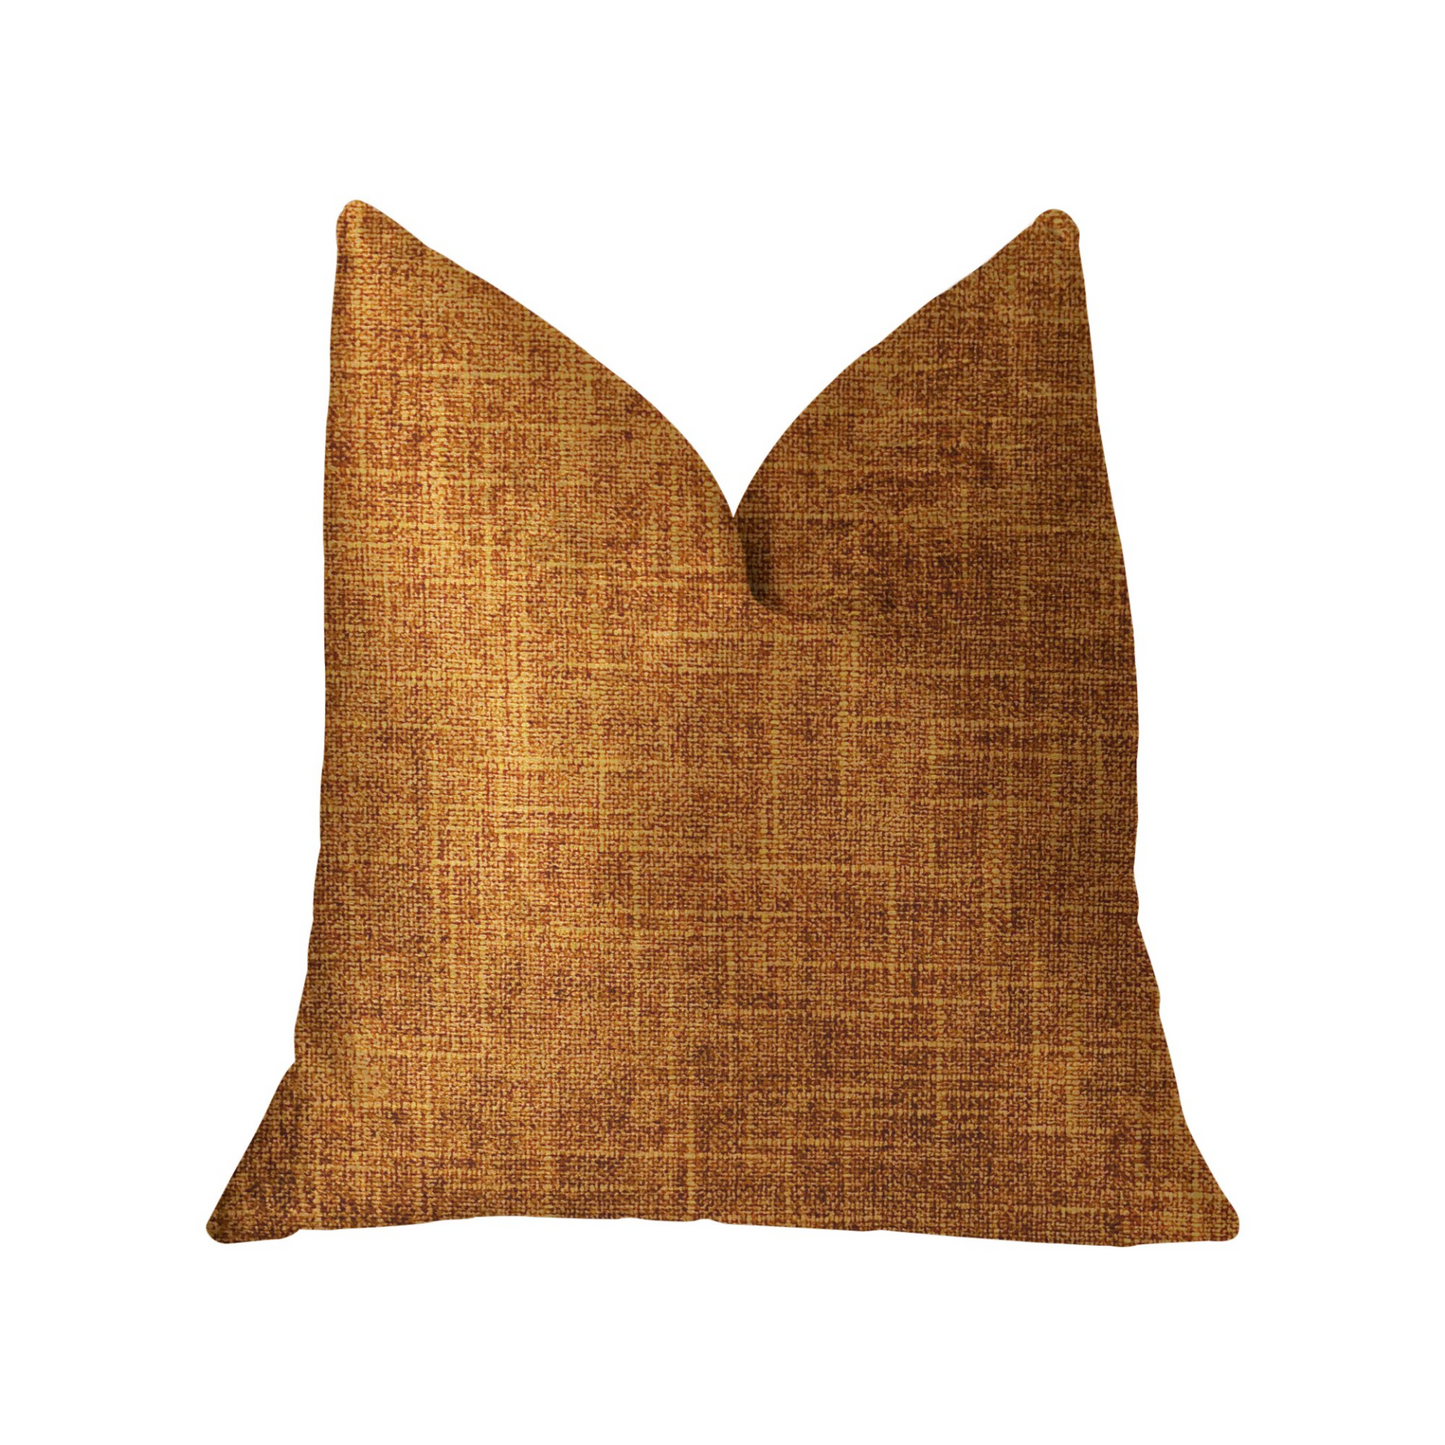 Marmalade Brown and Gold Luxury Throw Pillow